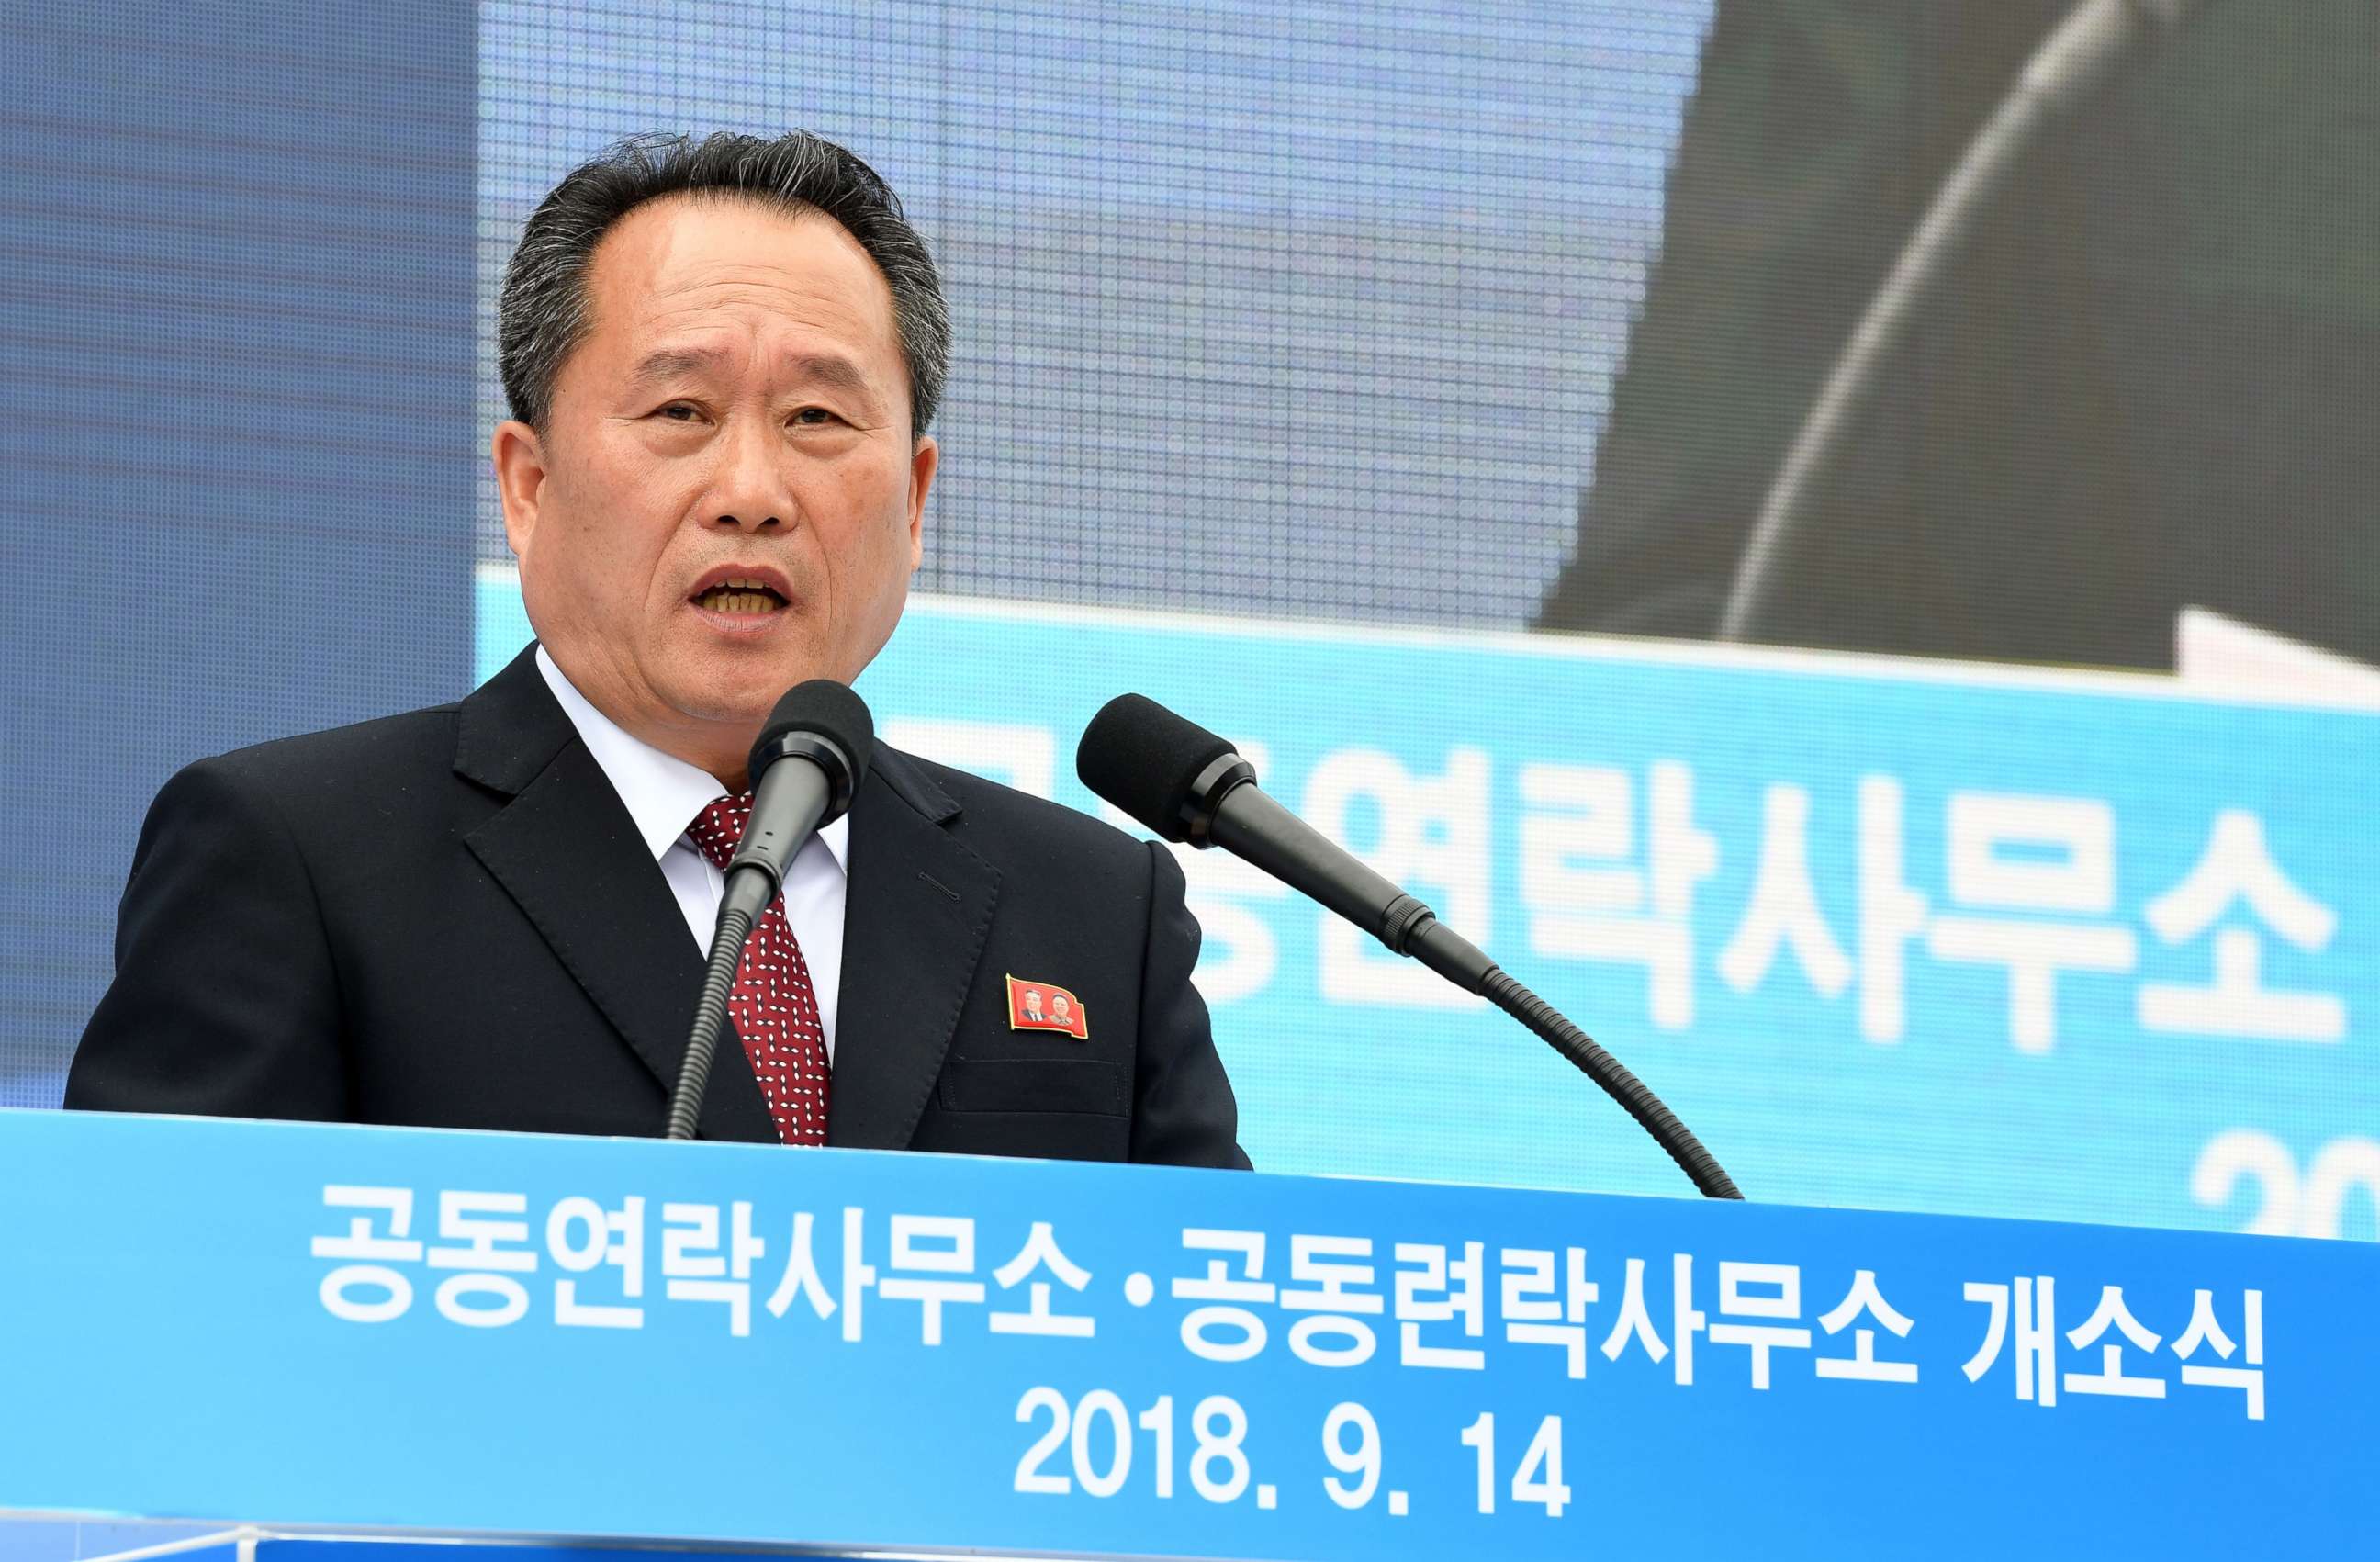 PHOTO: Ri Son-gwon, chairman of North Korea's Committee for the Peaceful Reunification of the Country, speaks during a ceremony in the North Korean border town of Kaesong, North Korea, Sept. 14, 2018.